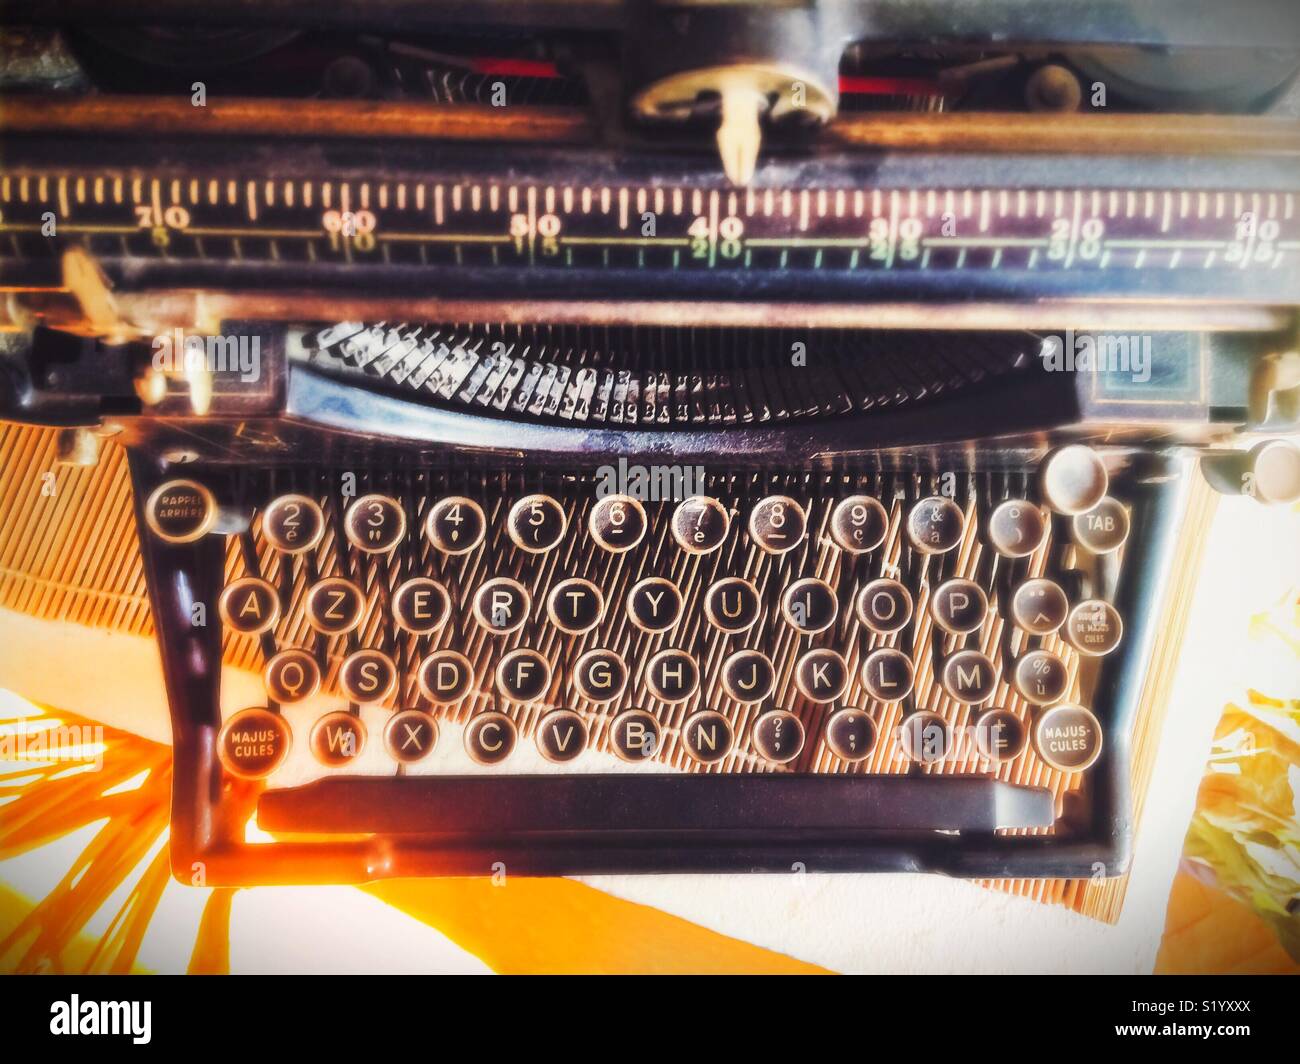 Top view of an old vintage typewriter, flat lay picture. Stock Photo